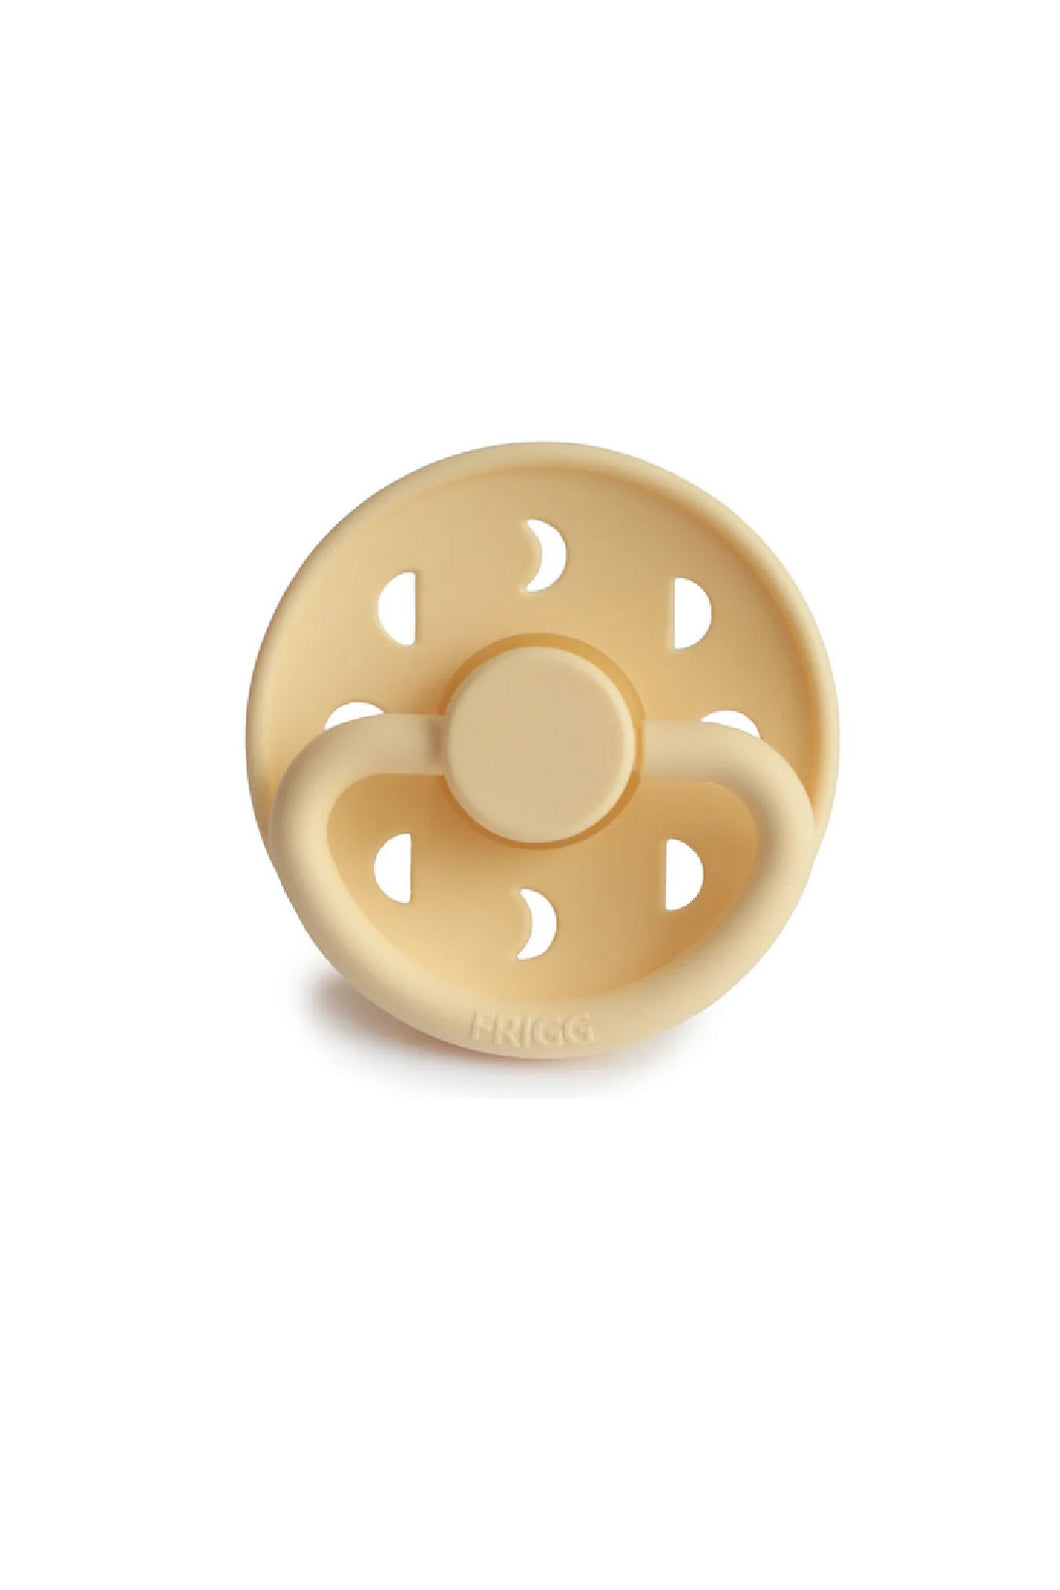 Frigg Moon Natural Rubber Pacifier - Pale Daffodil